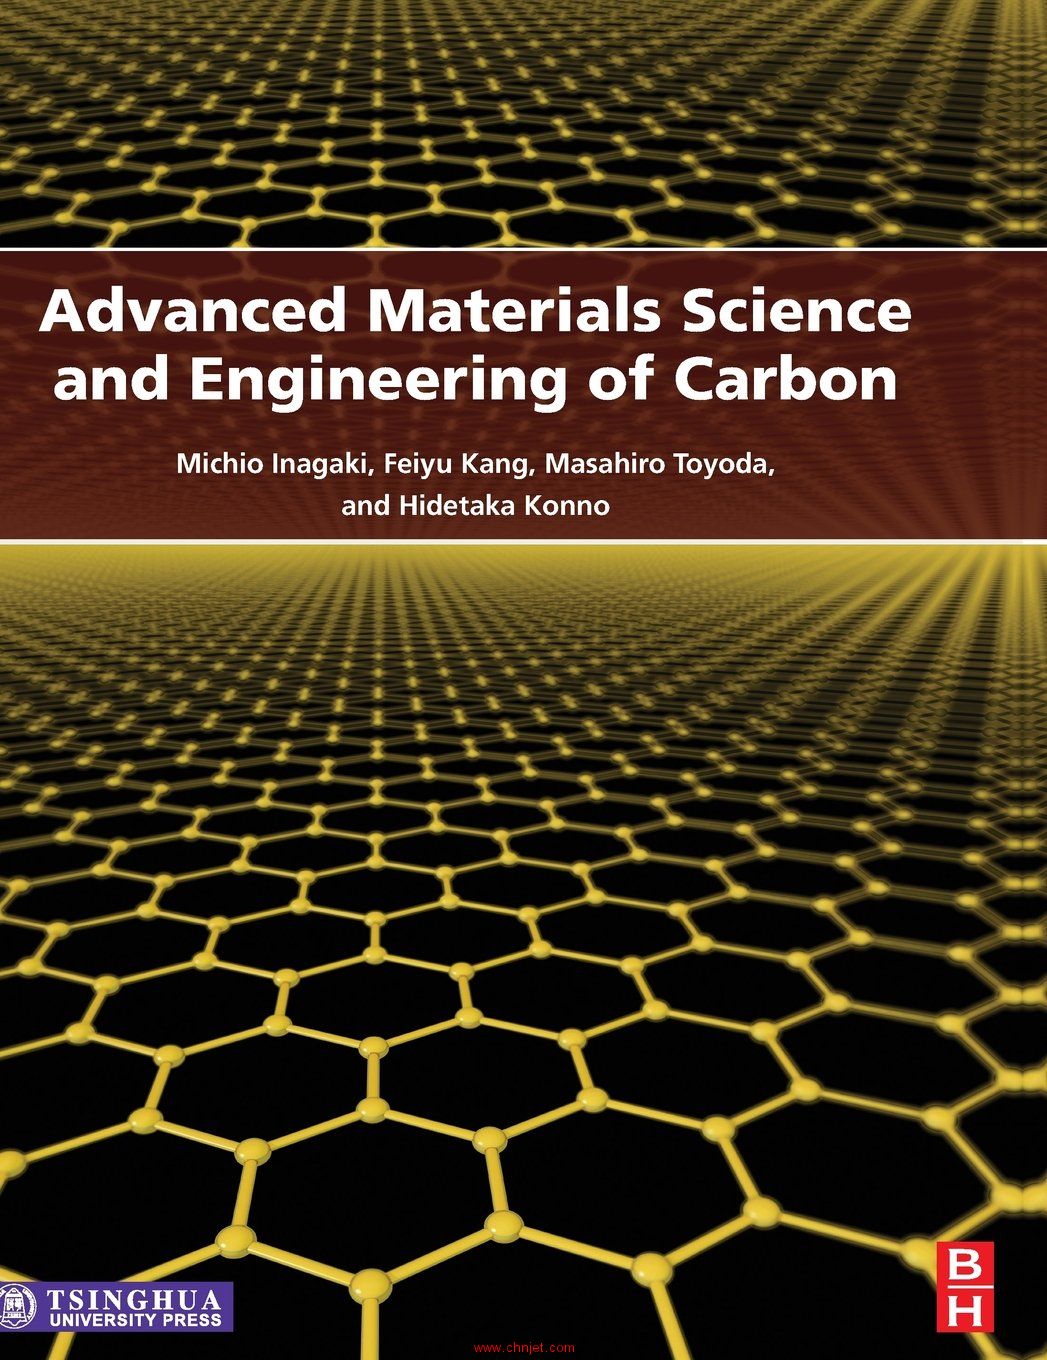 《Advanced Materials Science and Engineering of Carbon》